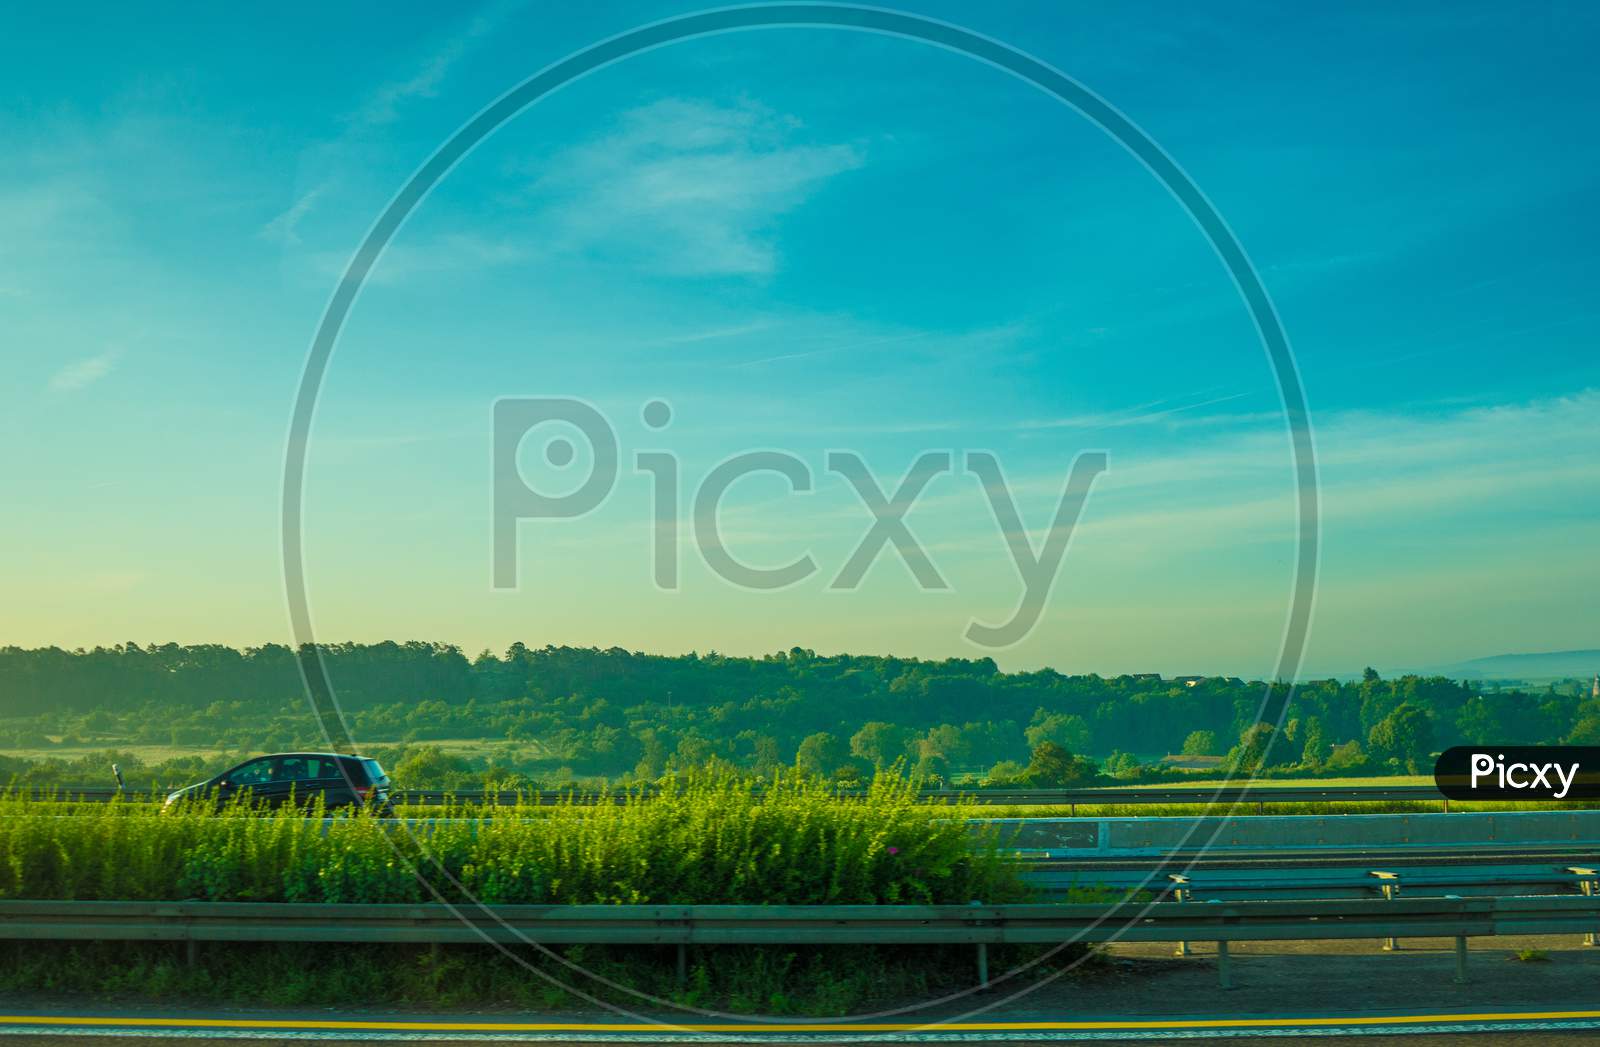 Germany, Frankfurt, Sunrise, A Large Green Landscape With A Body Of Water